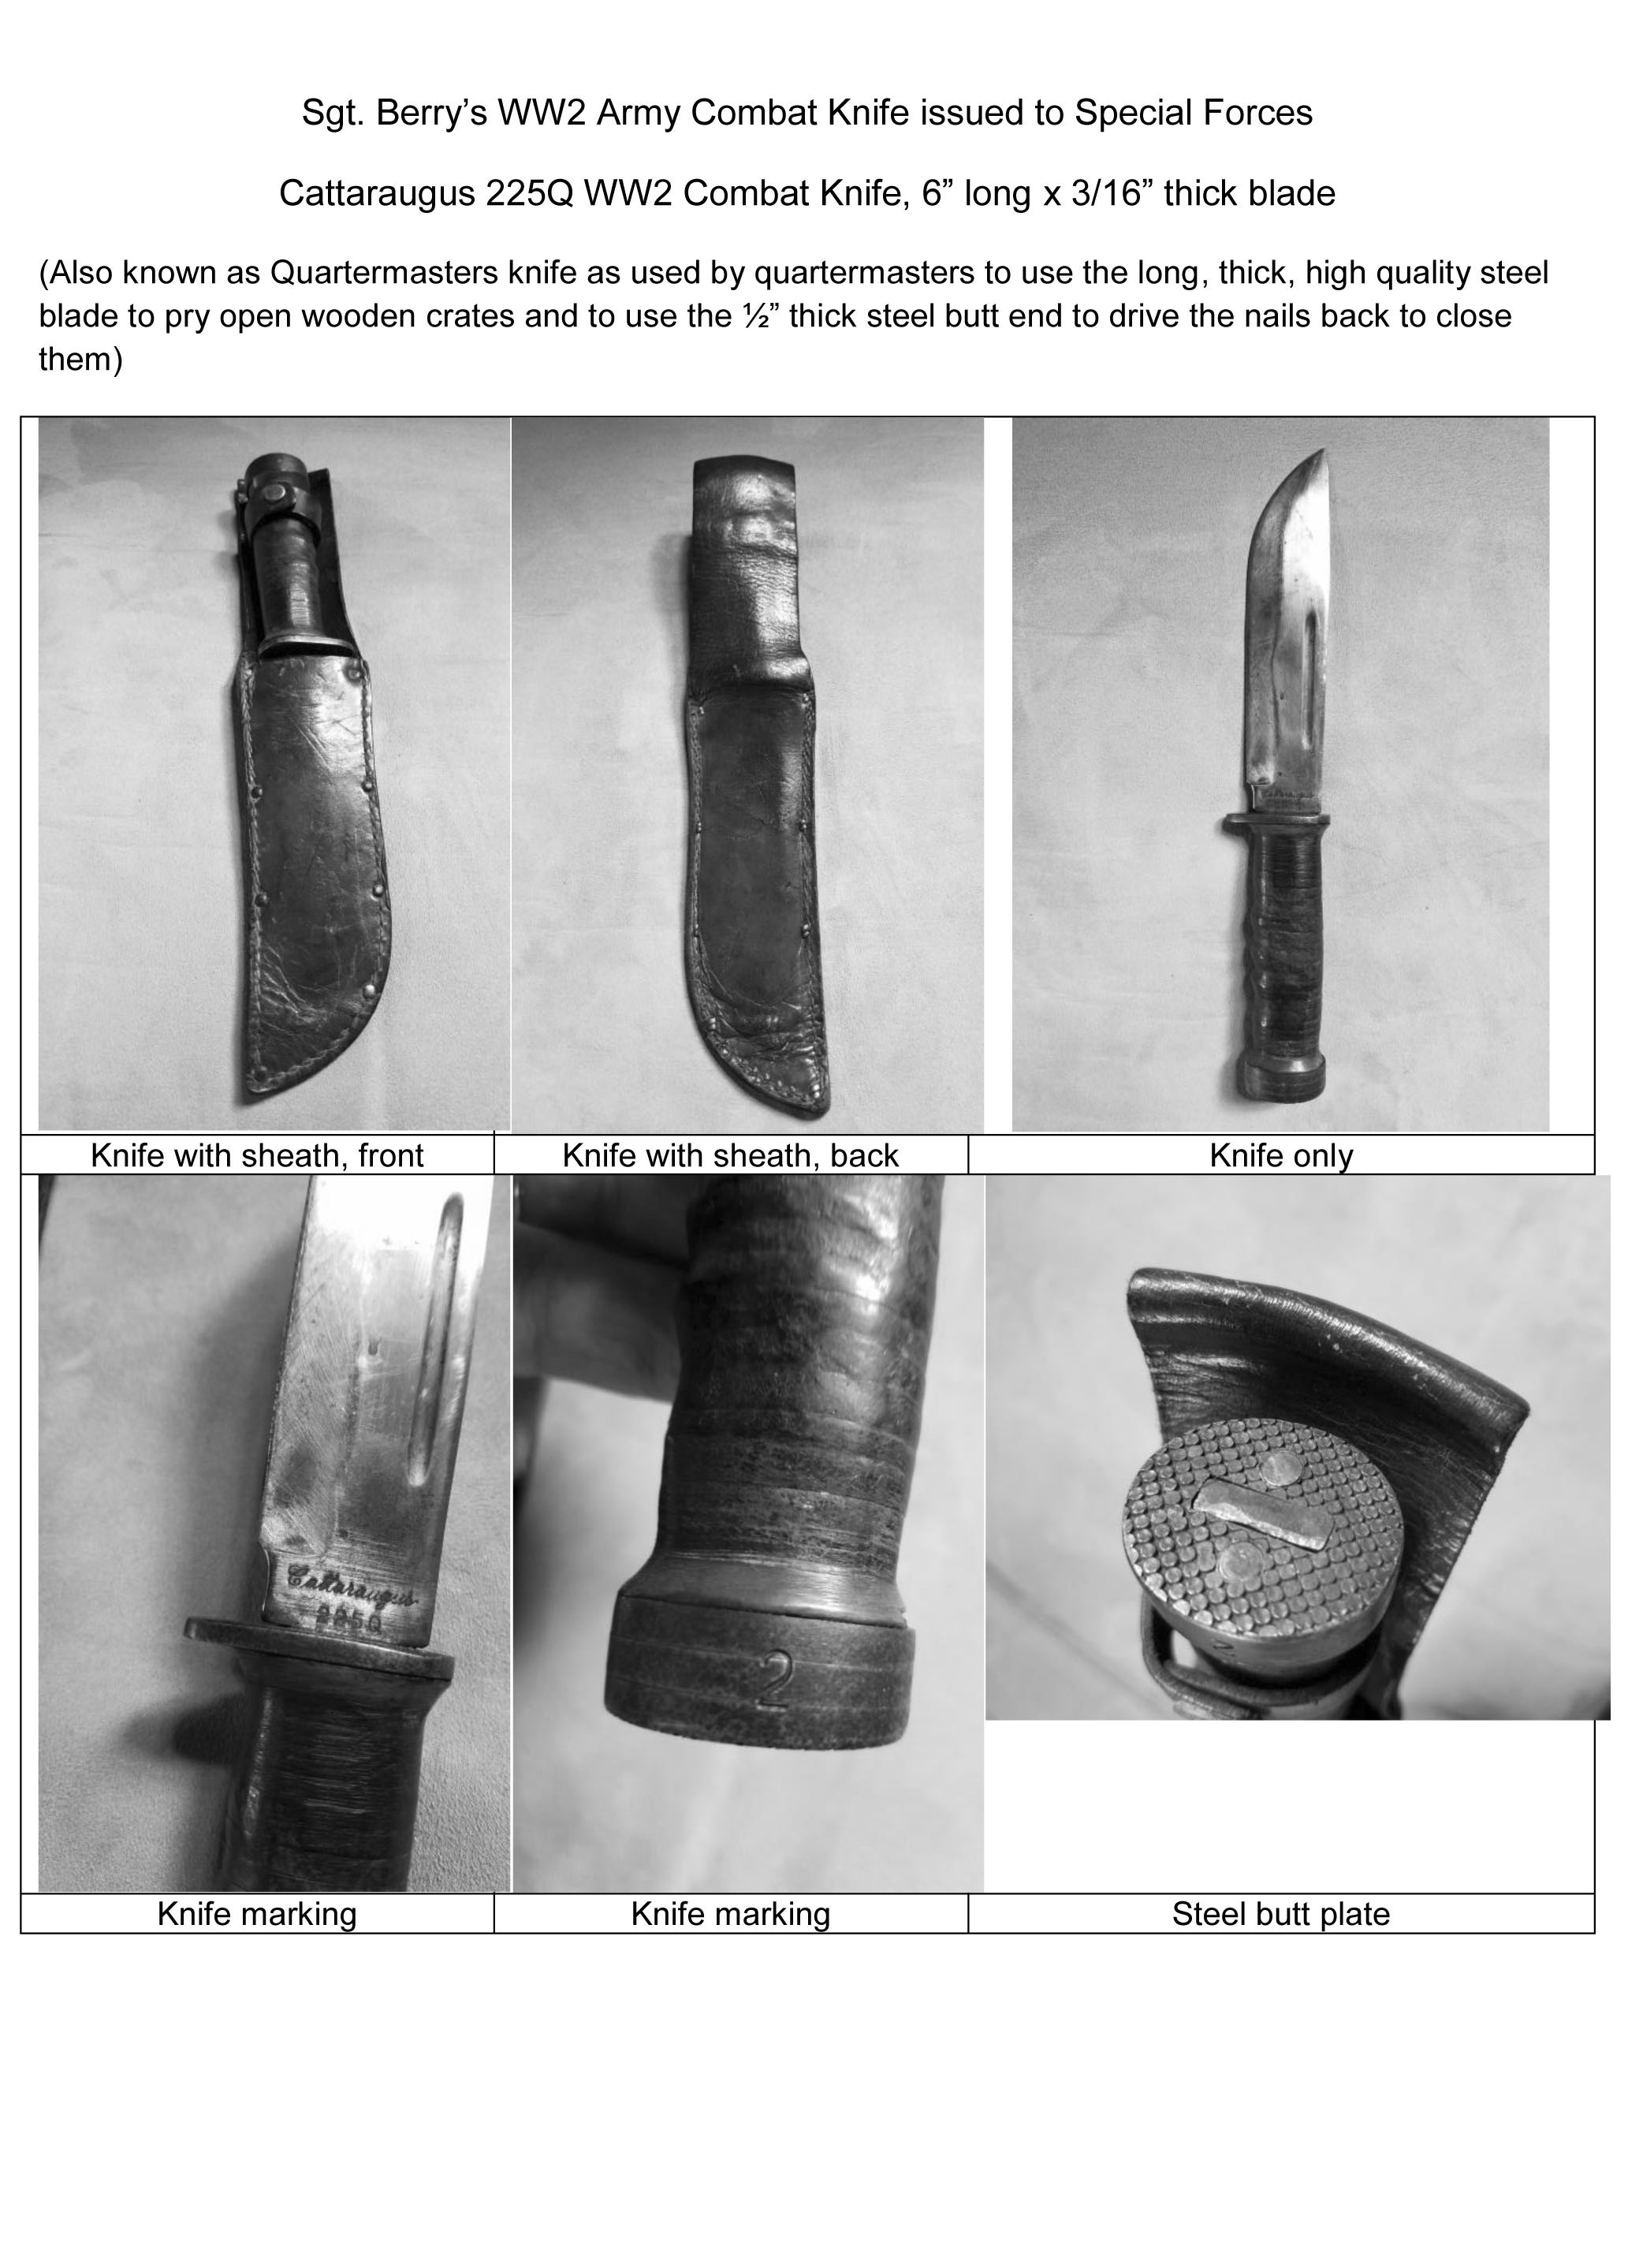 S/Sgt. Harry G. Berry's Combat Knife